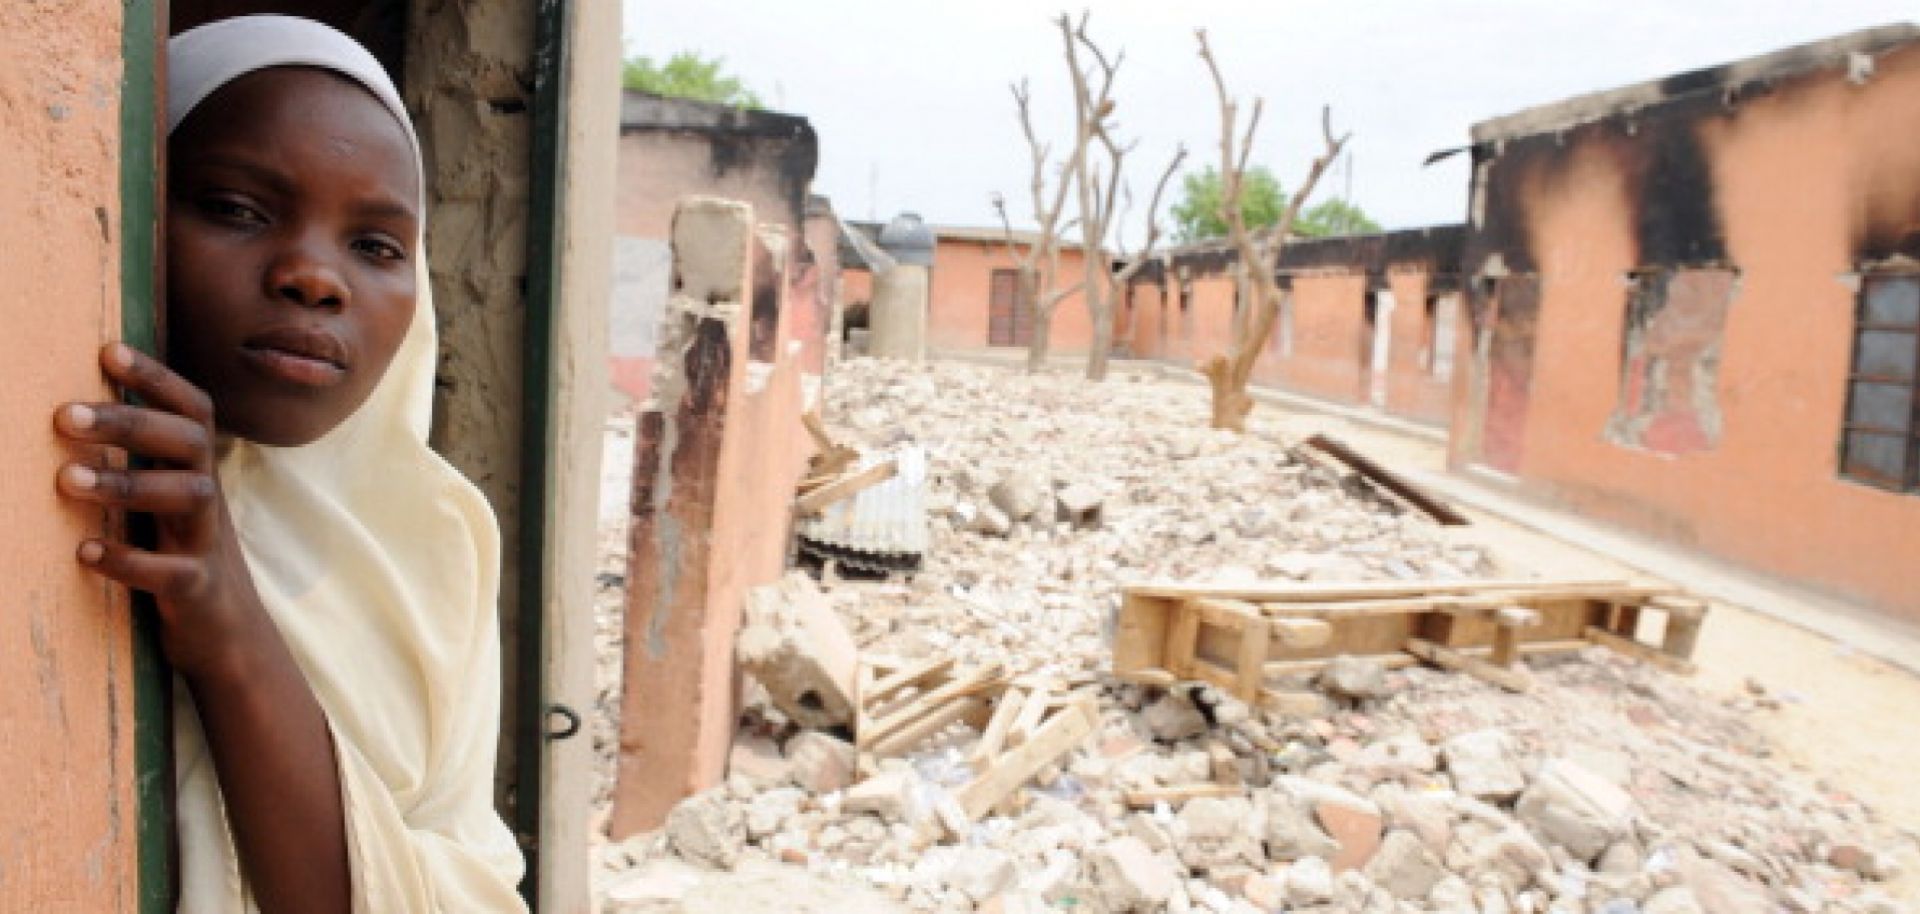 A student stands in what’s left of her school after Boko Haram burned it down in northeastern Nigeria. 